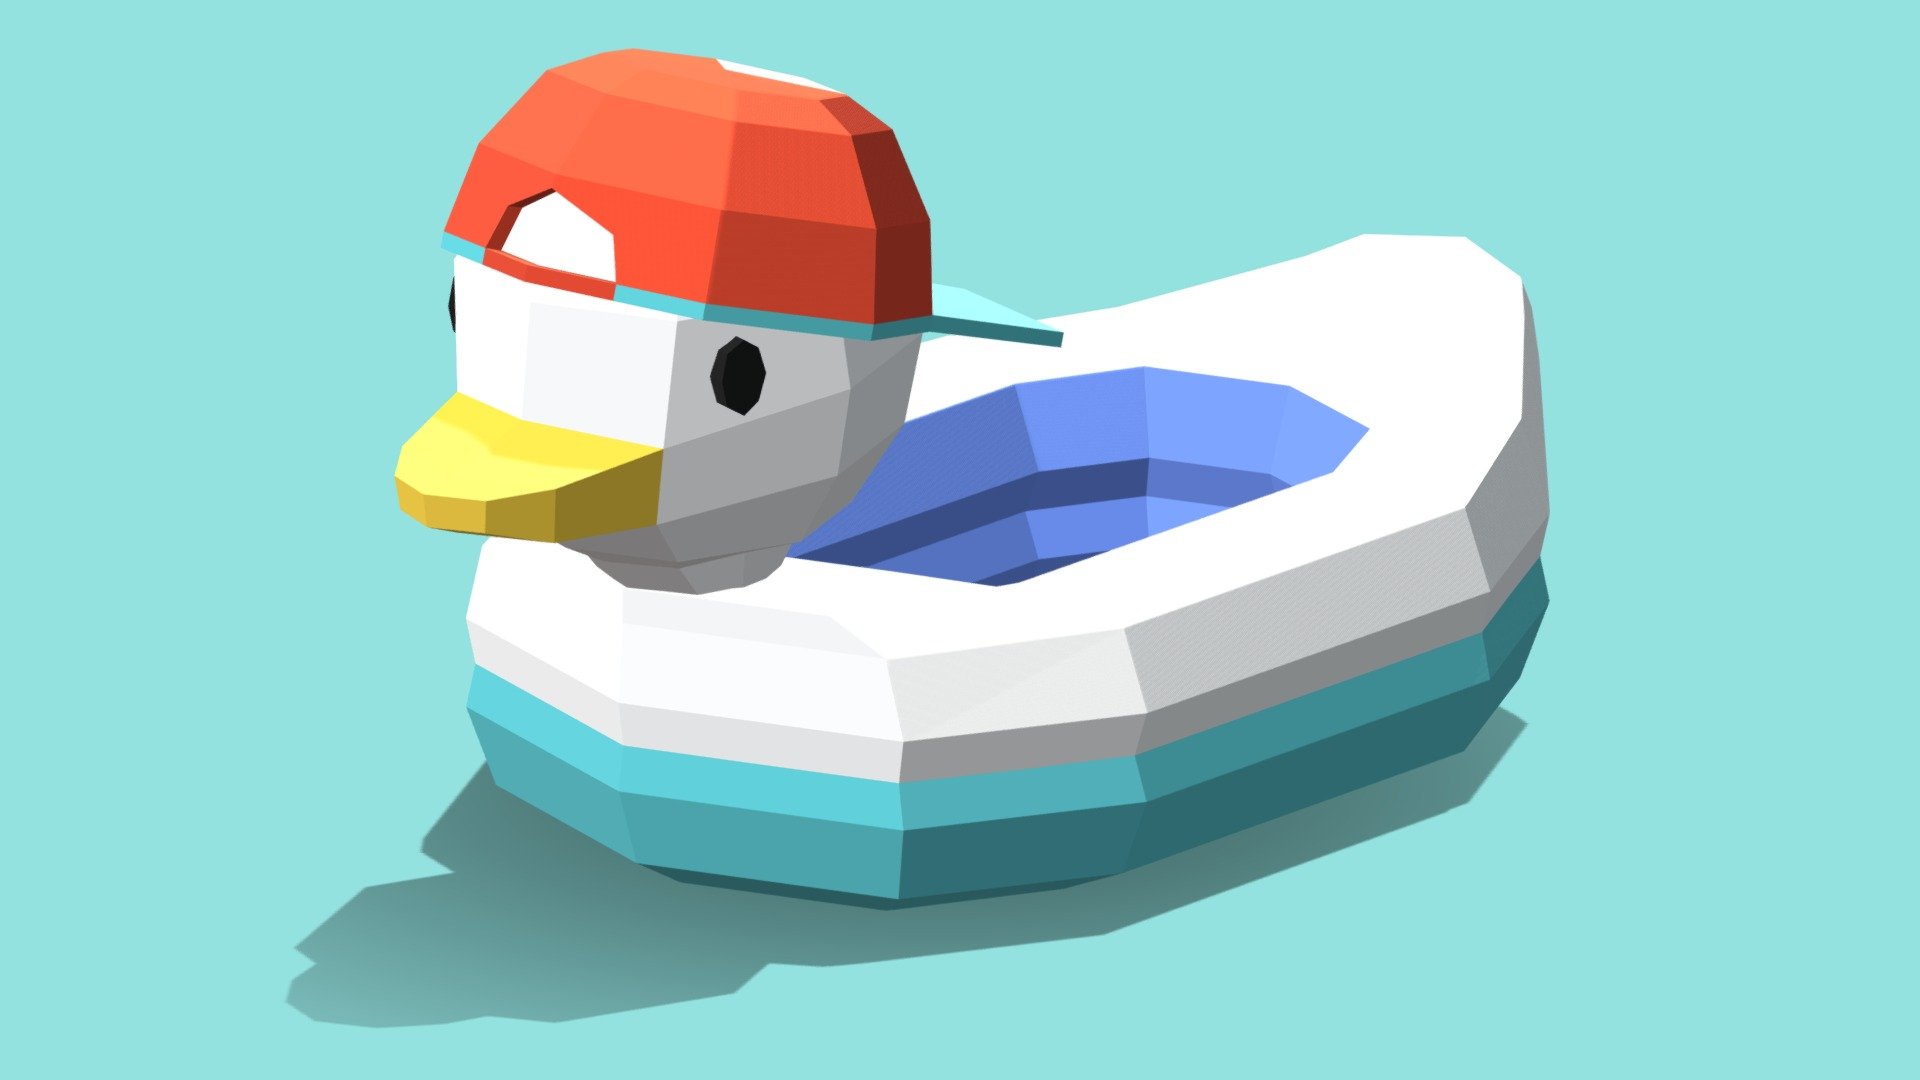 A simple lowpoly duck dinghy ship based off of the popular meme featuring Oozora Subaru from Hololive.

Originally made for an Amelia Watson fan animation found here: https://twitter.com/VRBobbie/status/1442193837175099402 - Shuba Duck Dinghy - Download Free 3D model by BobbieVR 3d model